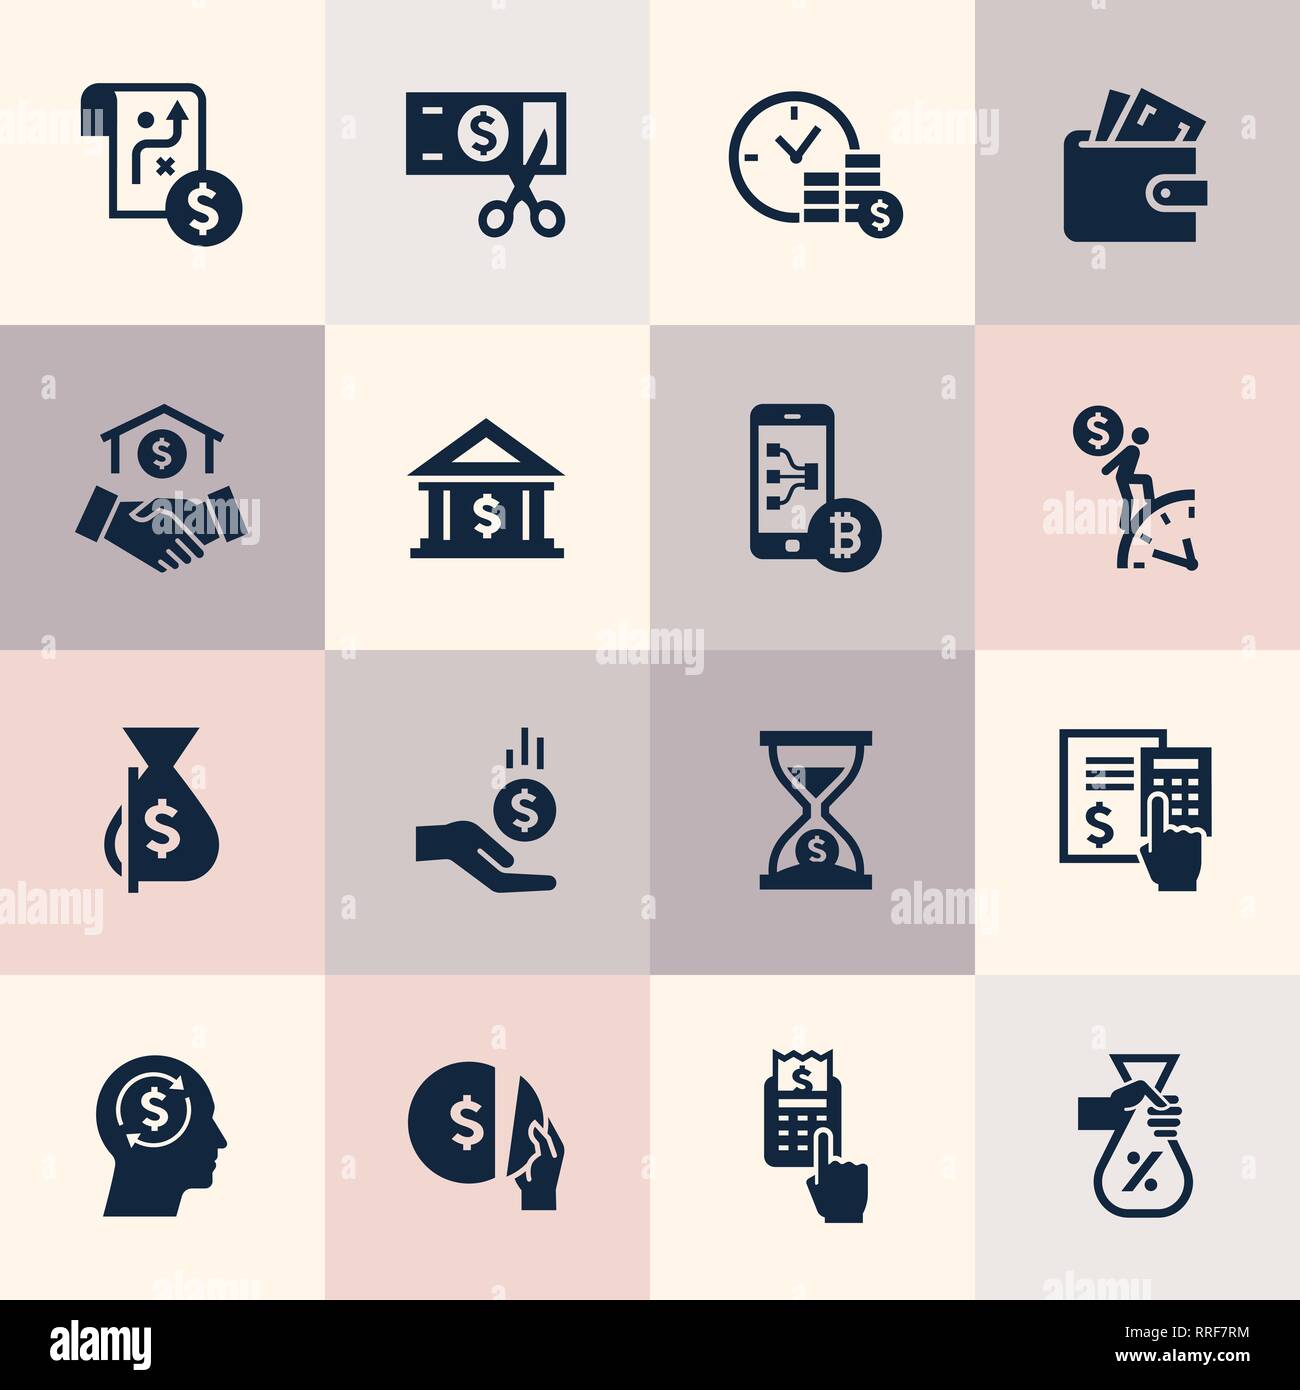 Set of flat design concept icons for finance, banking, business, payment, and monetary operations. Stock Vector